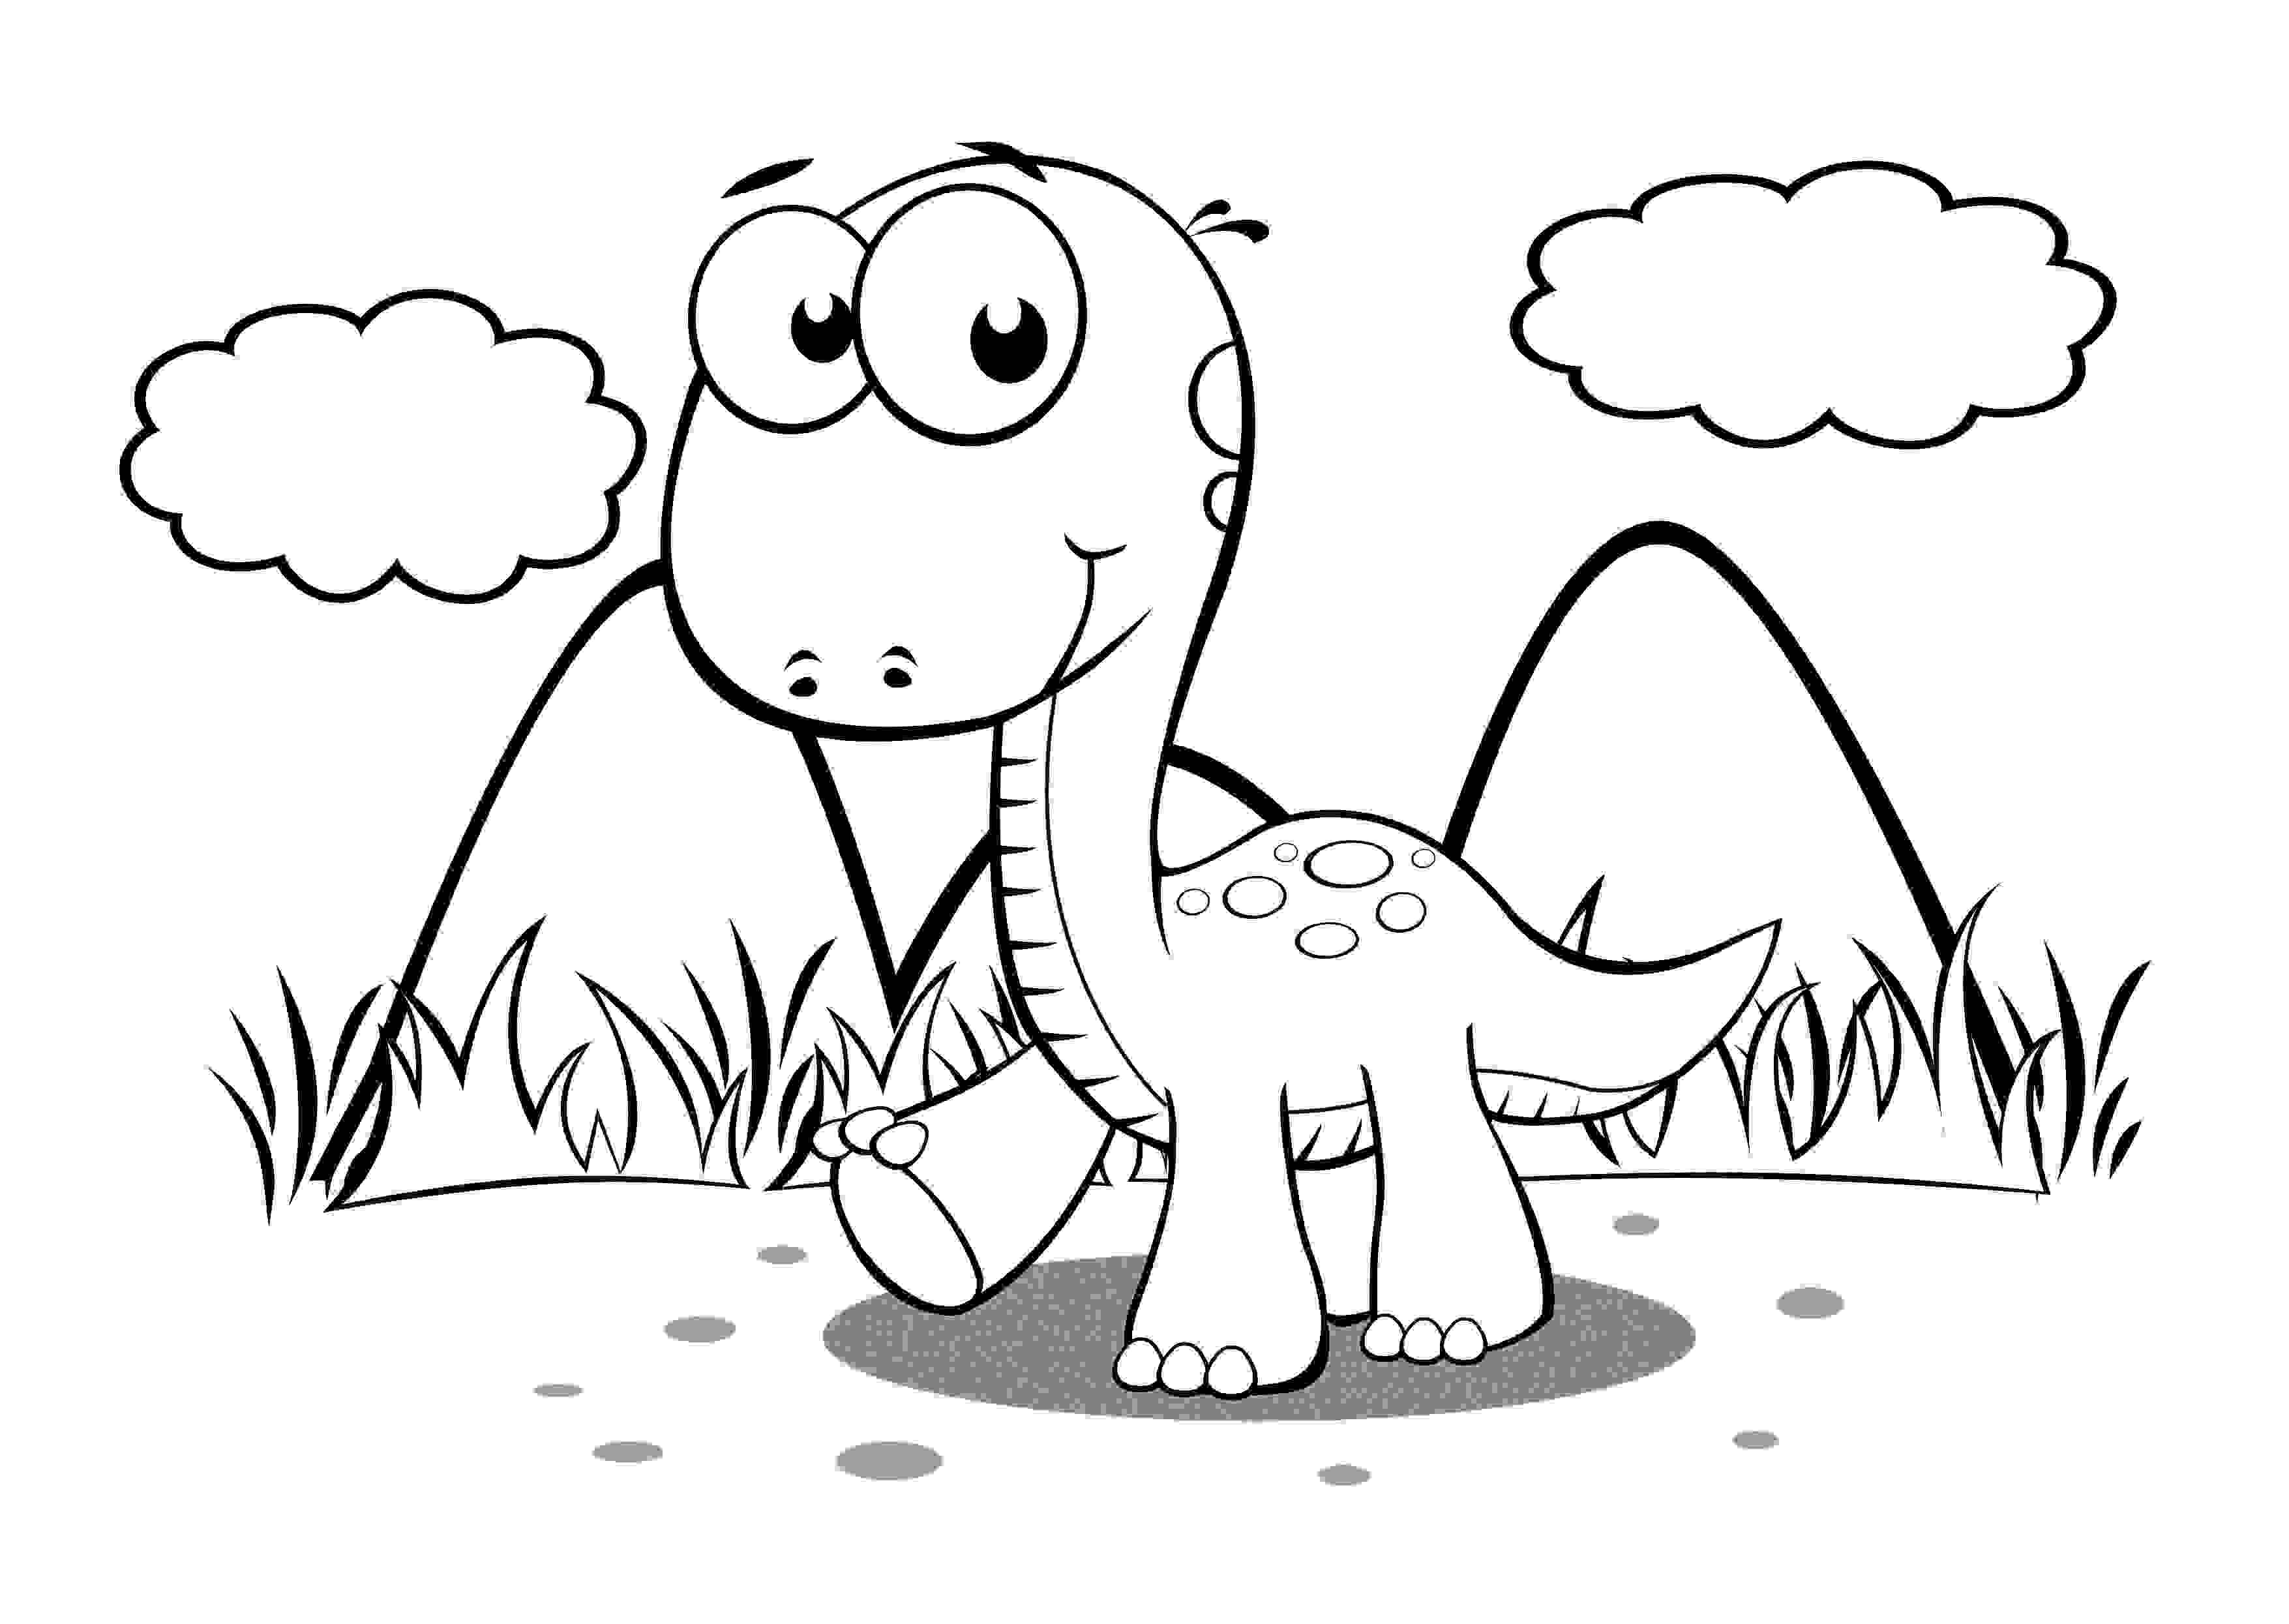 Baby Dinosaur goes around on cloud day Coloring Page